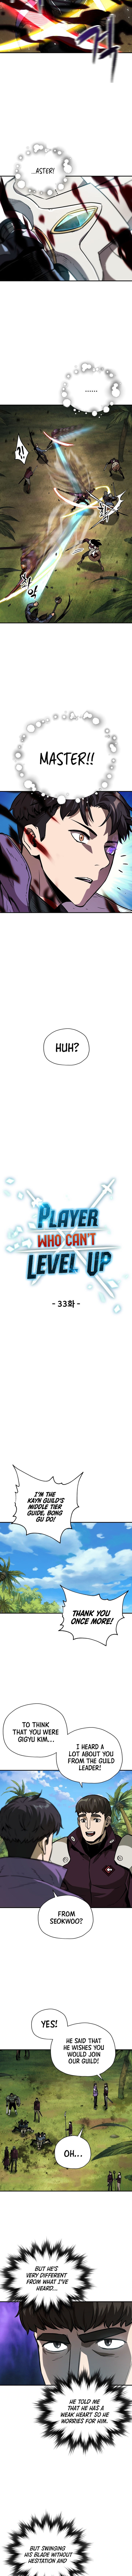 The Player That Can't Level Up - Chapter 33 Page 4